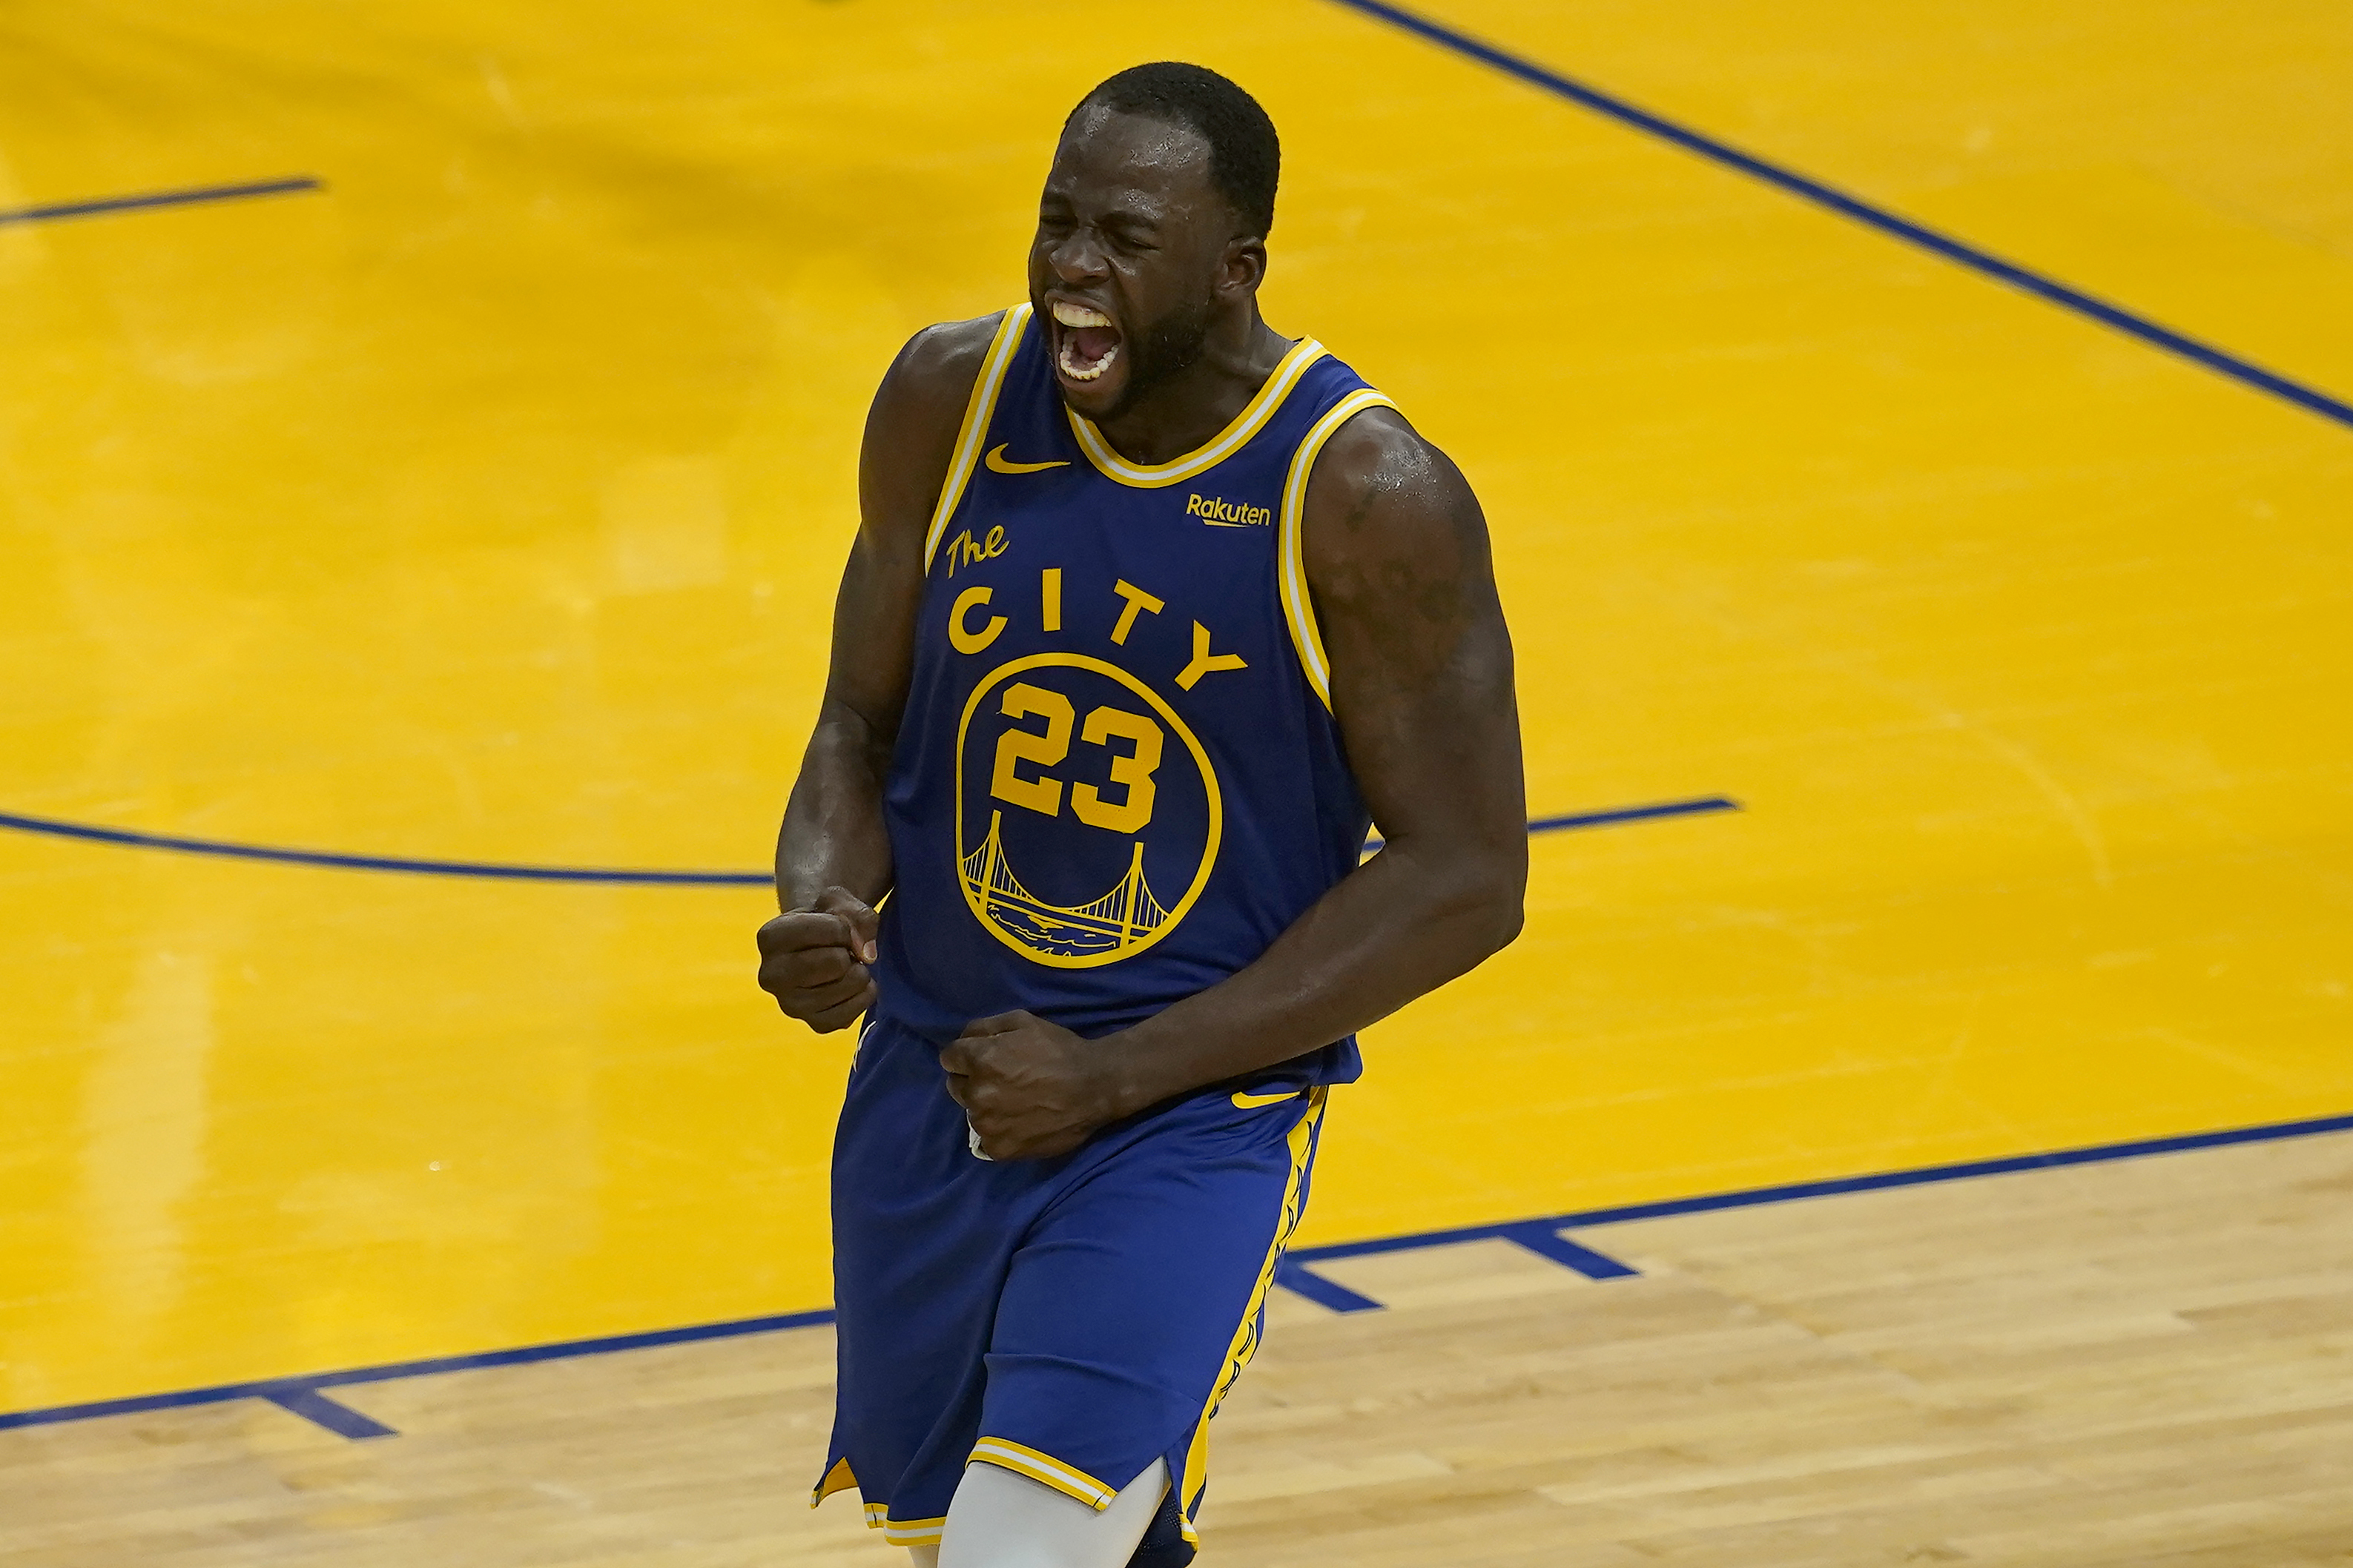 Draymond Green freaks out when he sees a Michigan shirt in media